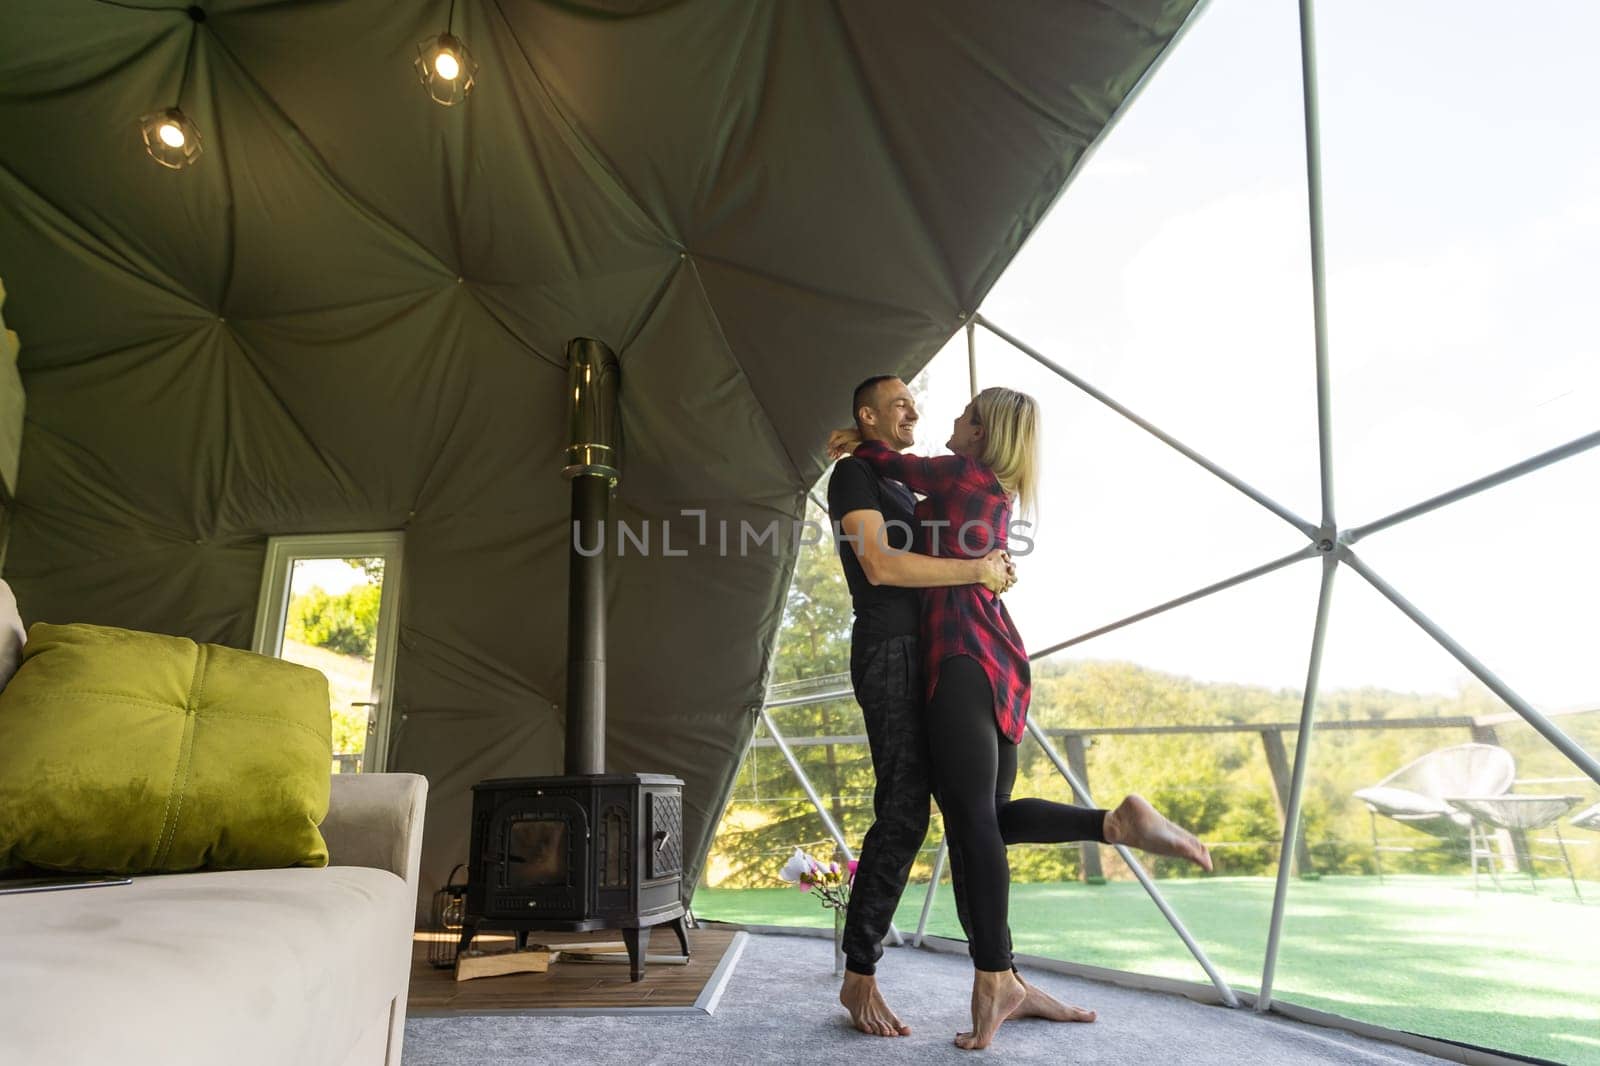 a couple dancing in geo dome tents. by Andelov13